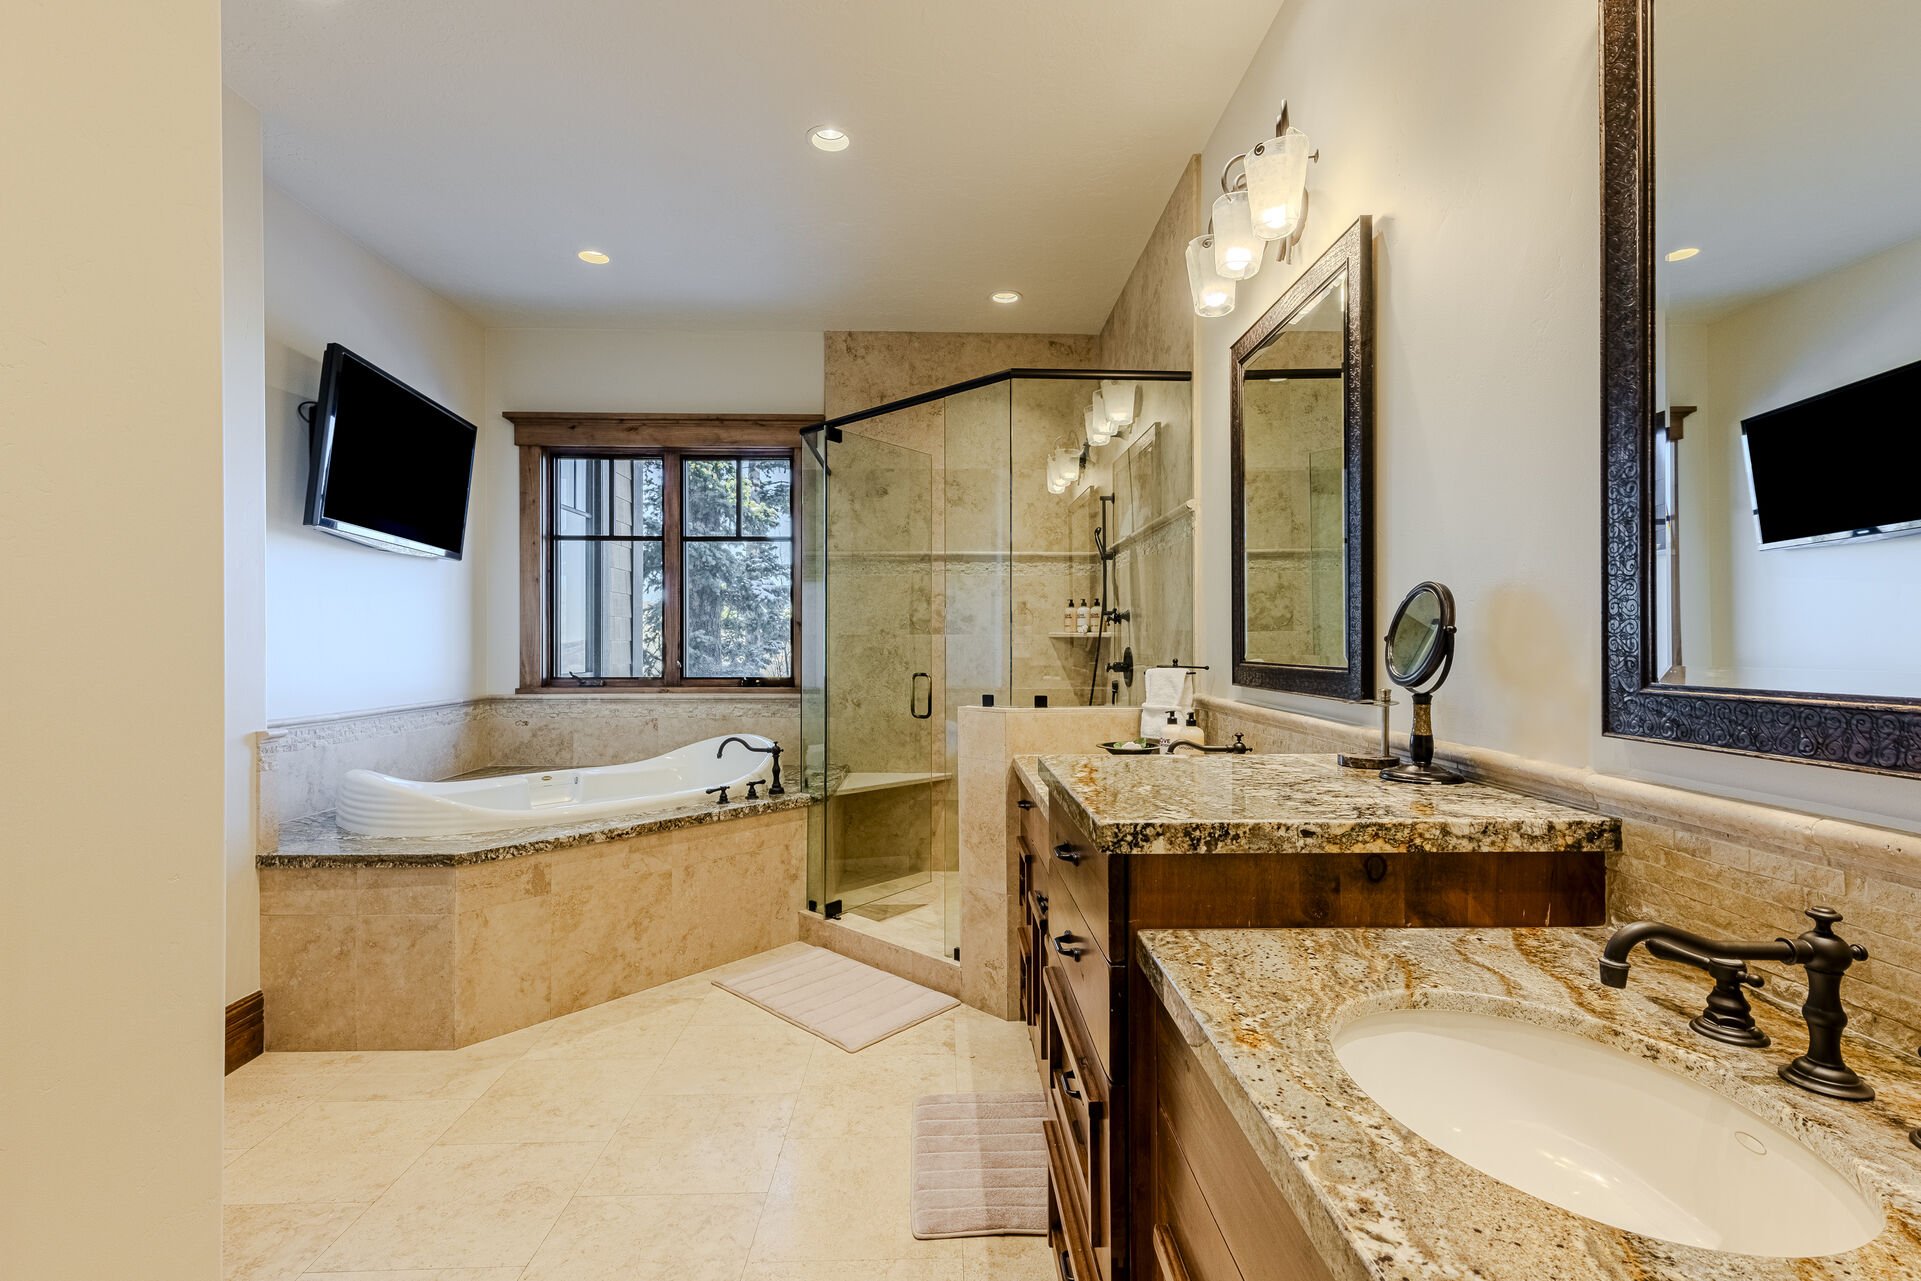 Master Bathroom with Roman Jetted Tub, Stone Shower, Two Vanities, and Walk-in Closet